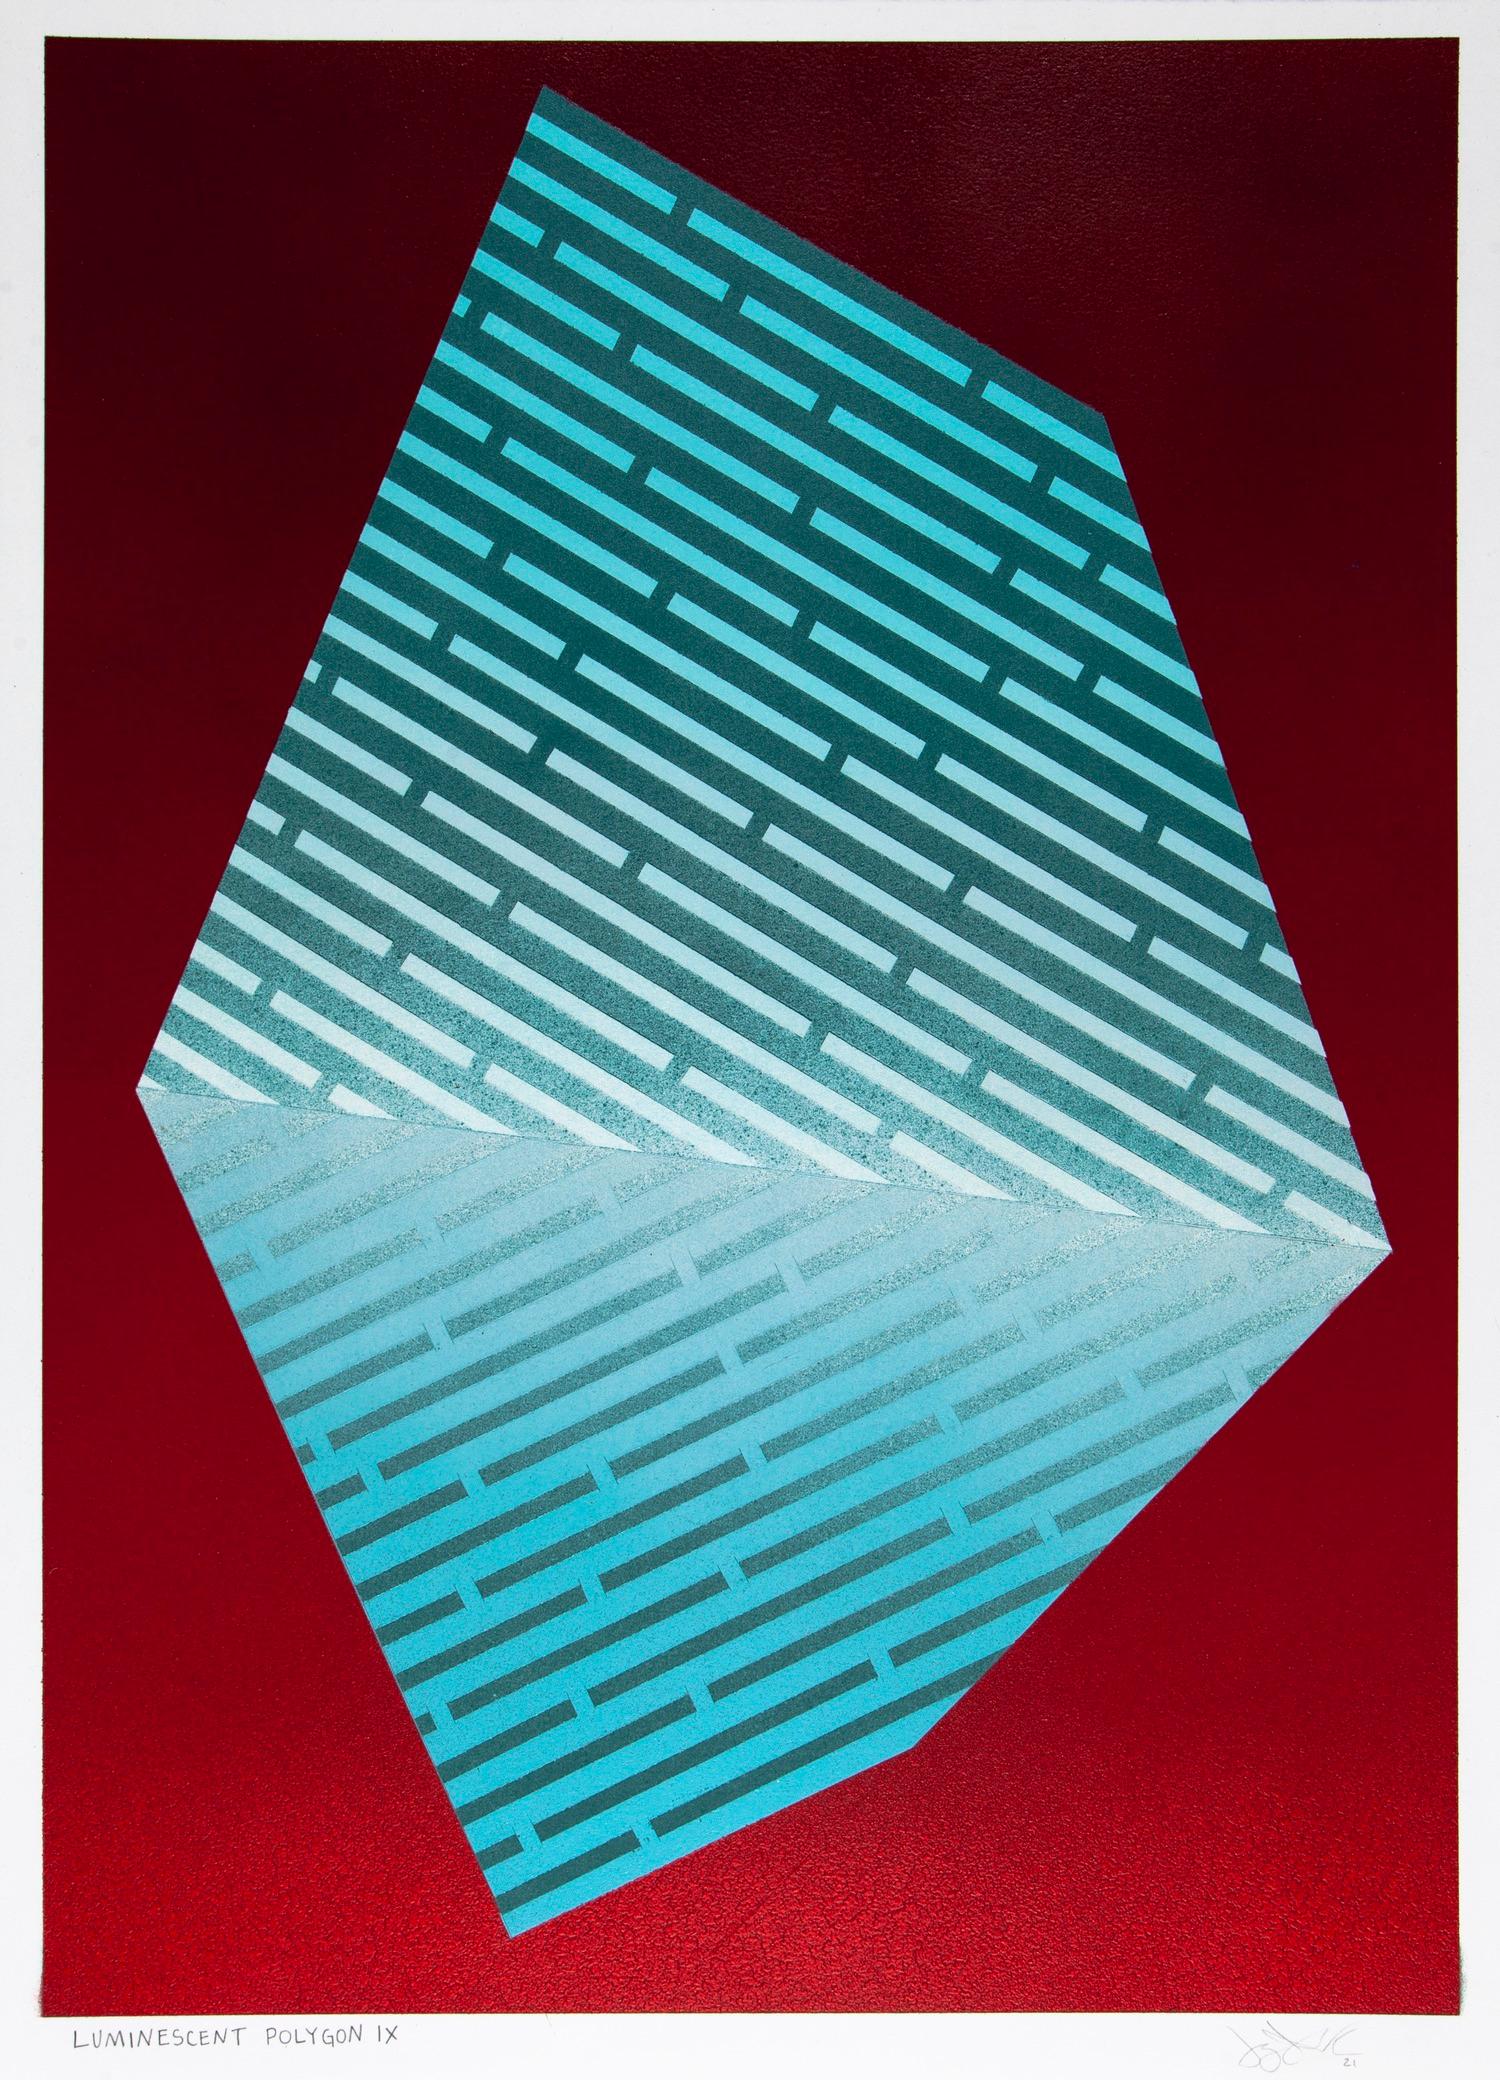 Jay Walker Figurative Painting - Luminescent Polygon IX: Matisse-inspired geometric abstract painting w/ blue red